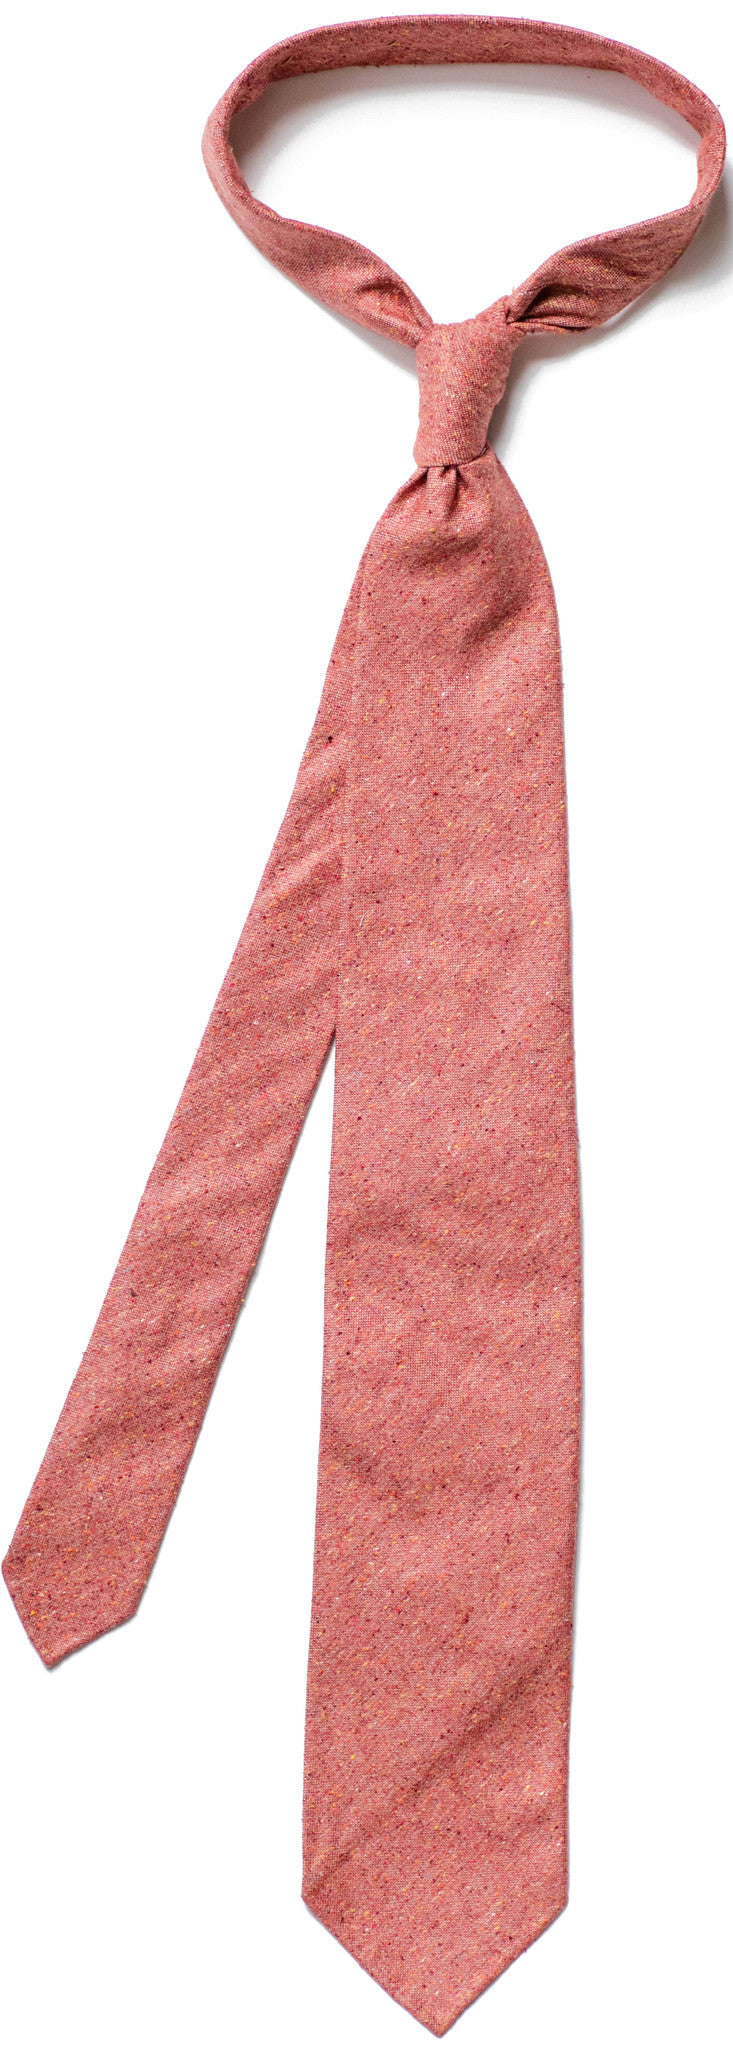 Speckled Brick Red Silk and Cotton Tie